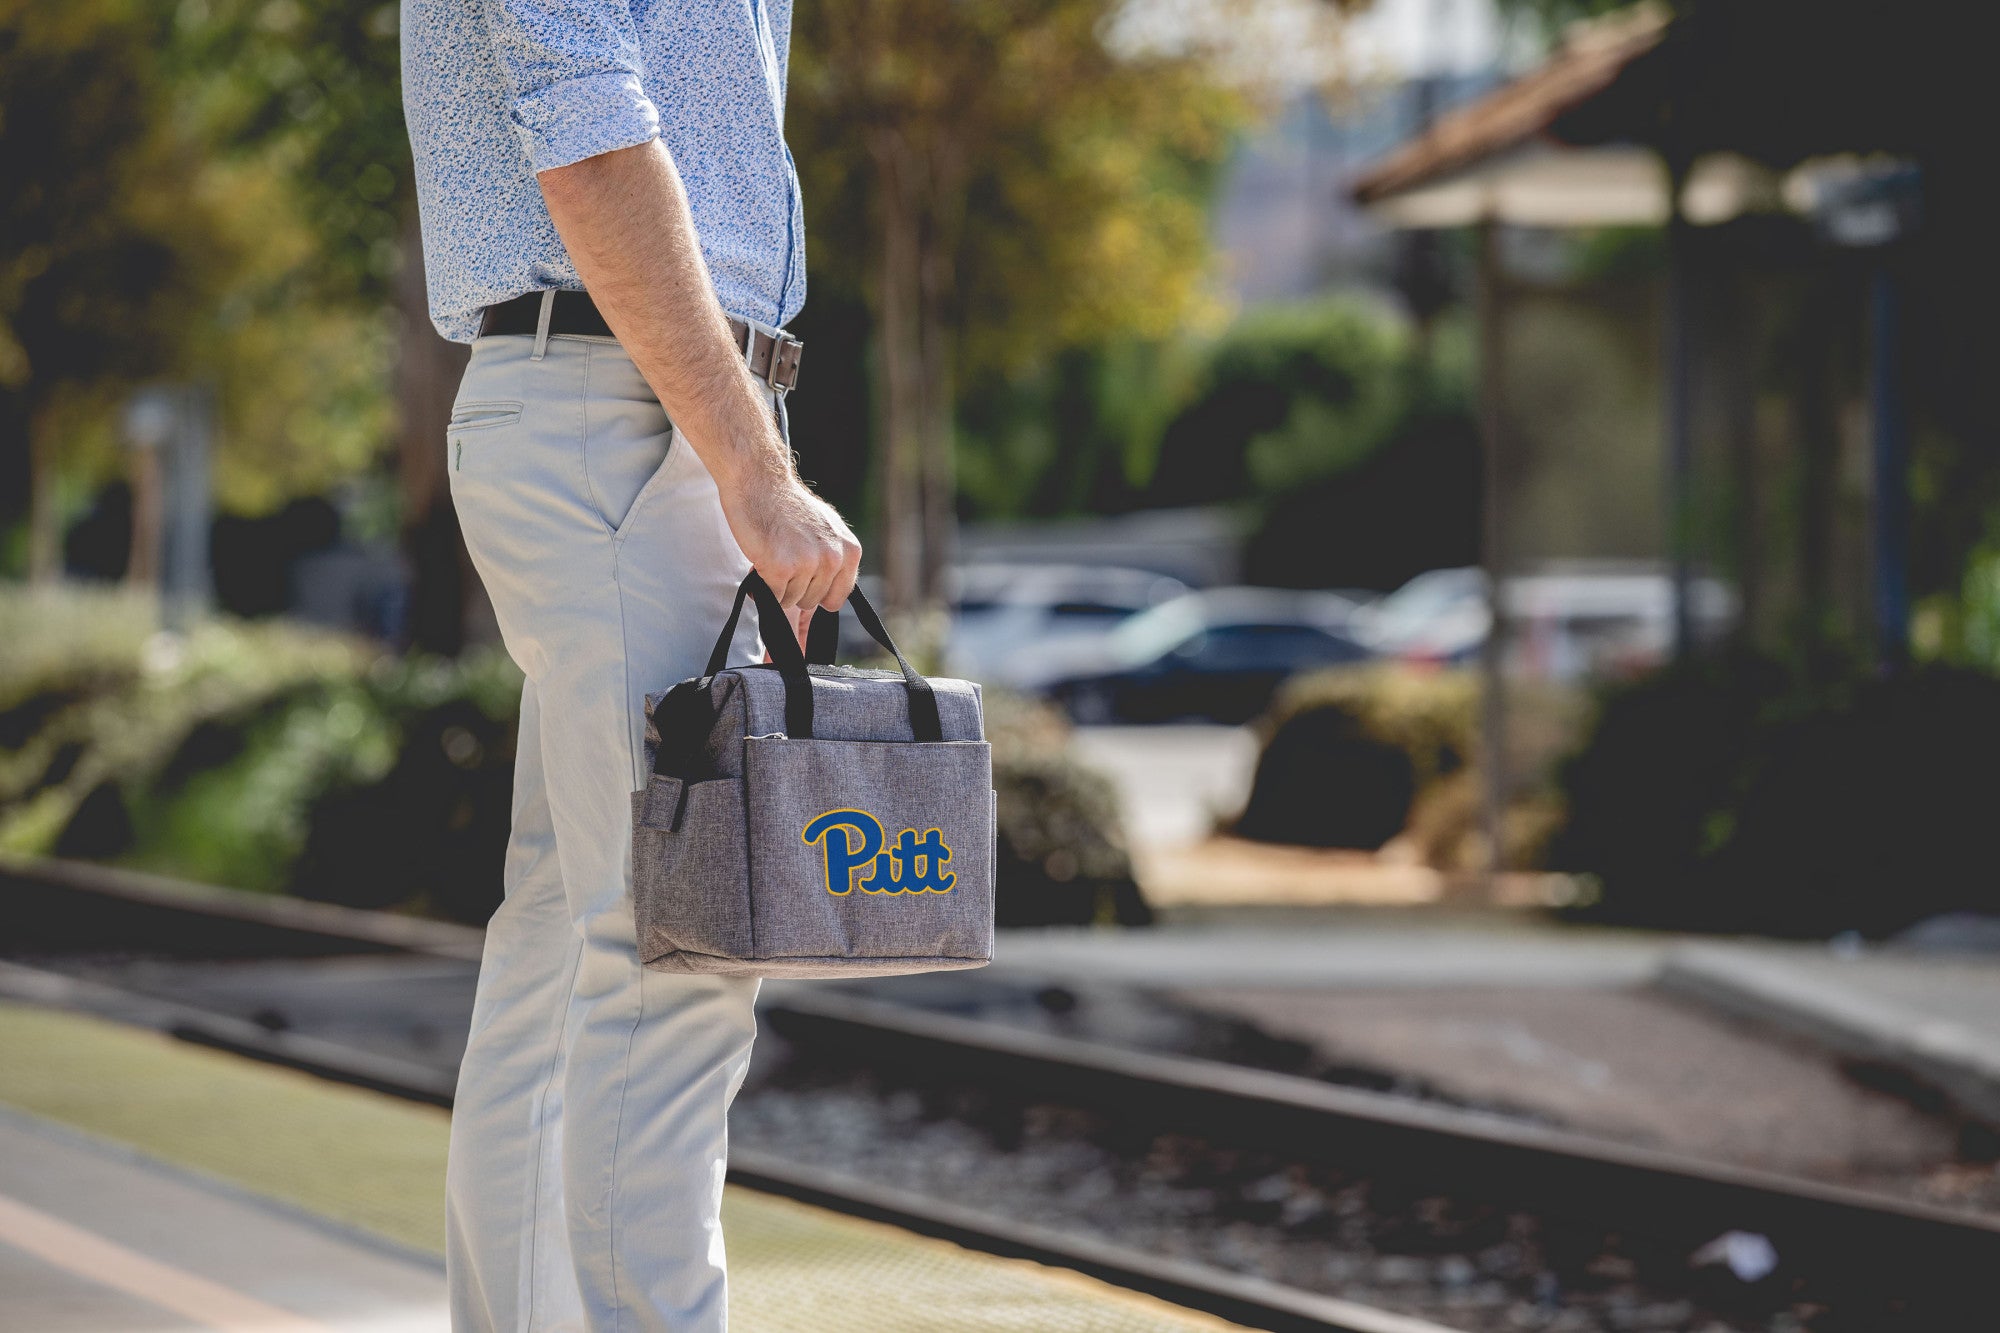 Pittsburgh Panthers - On The Go Lunch Bag Cooler